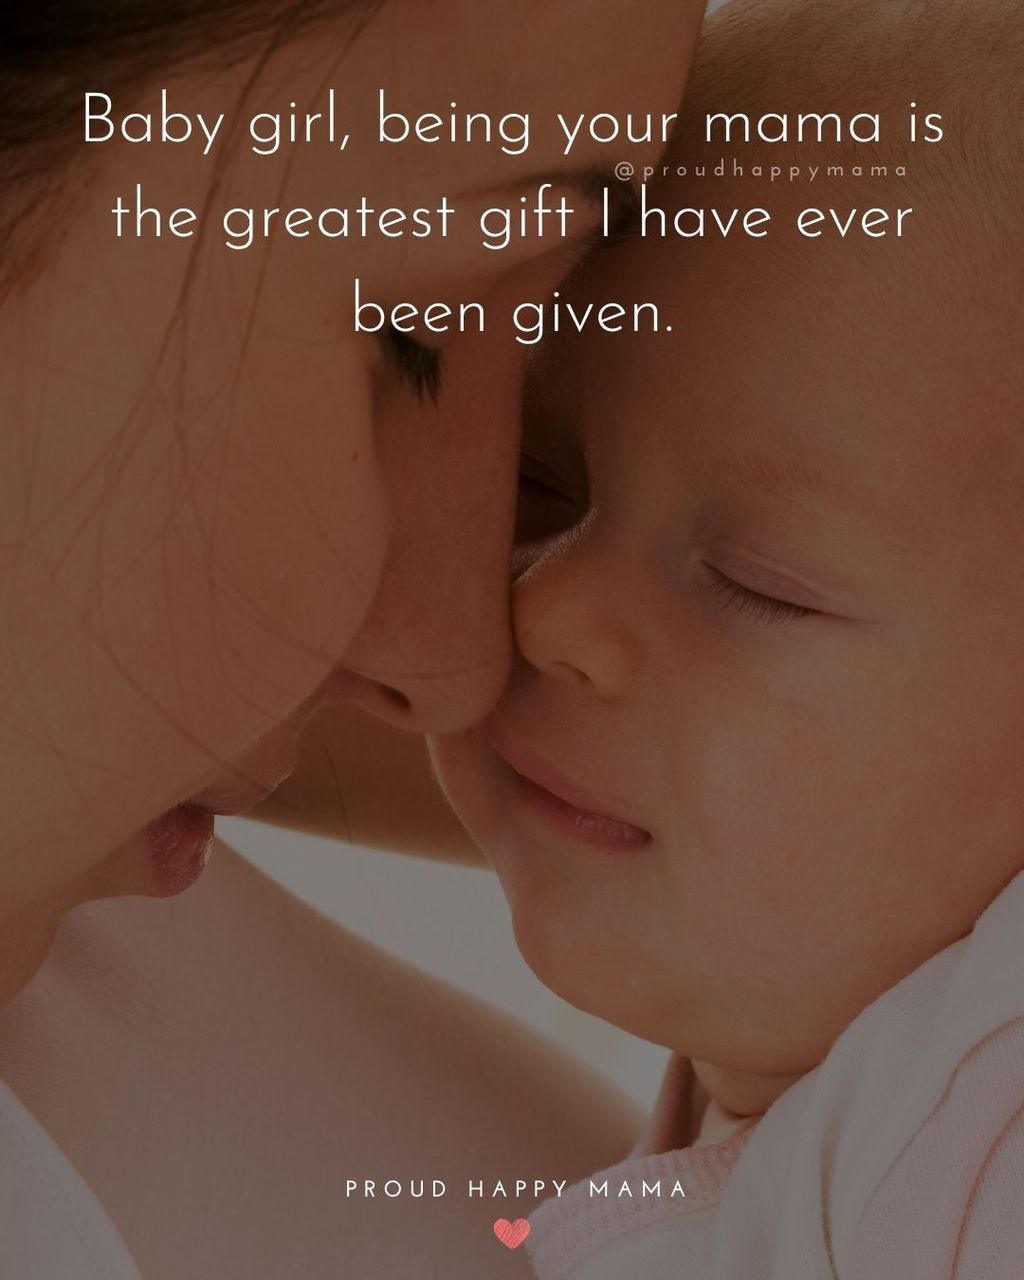 Baby Girl Quotes - Baby girl, being your mama is the greatest gift I have ever been given.